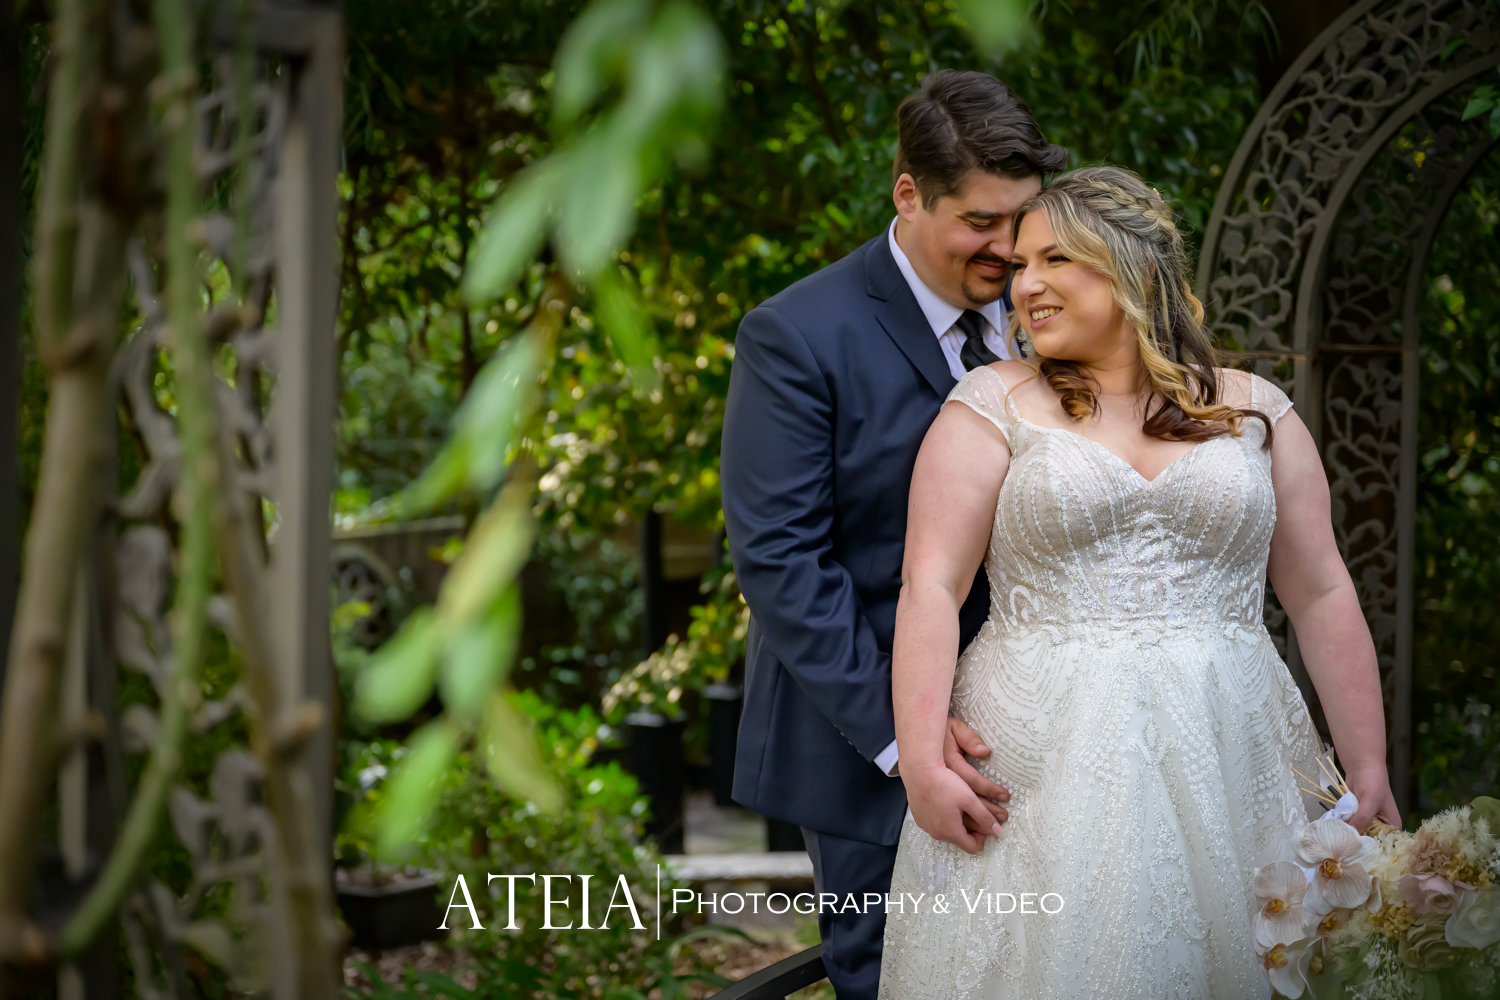 , Sasha and Daniel’s wedding at Avalon Castle captured by ATEIA Photography &#038; Video